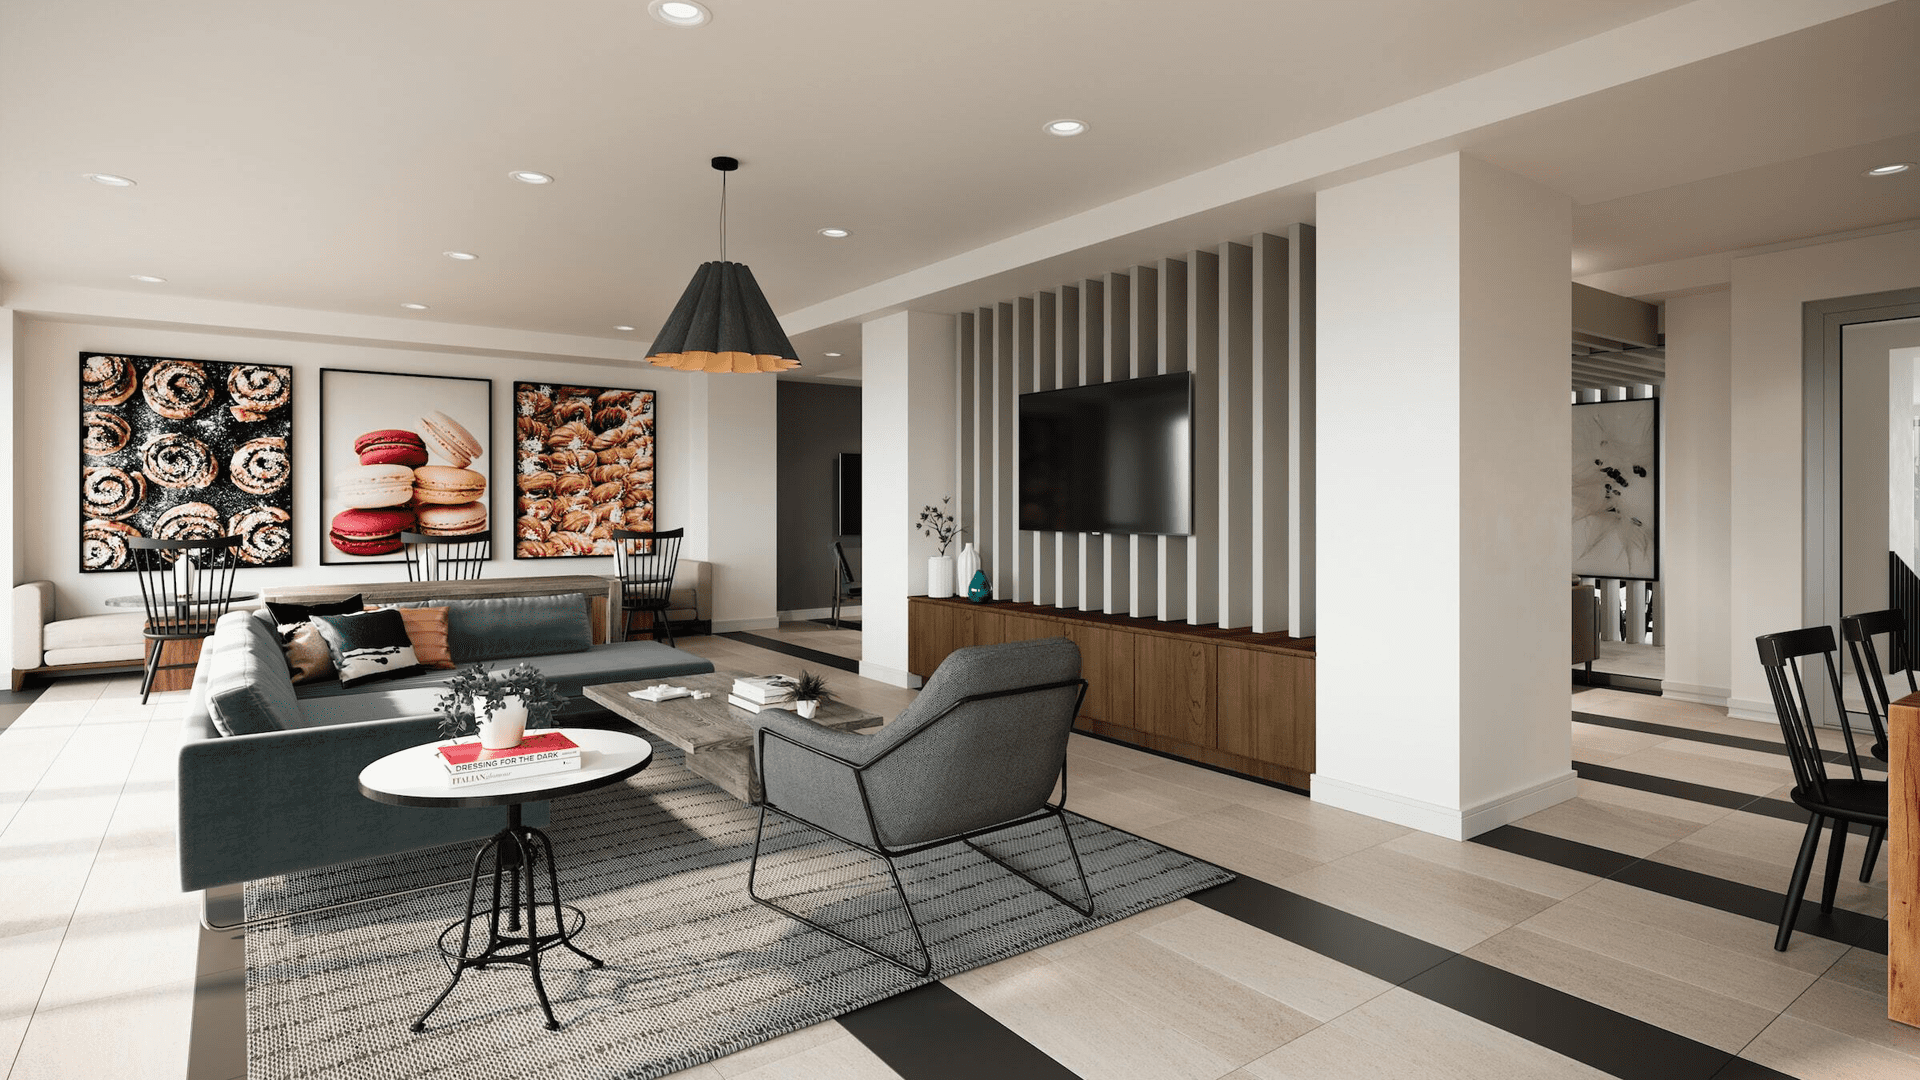 Render of indoor house settings with grey and wood accent furniture and decor